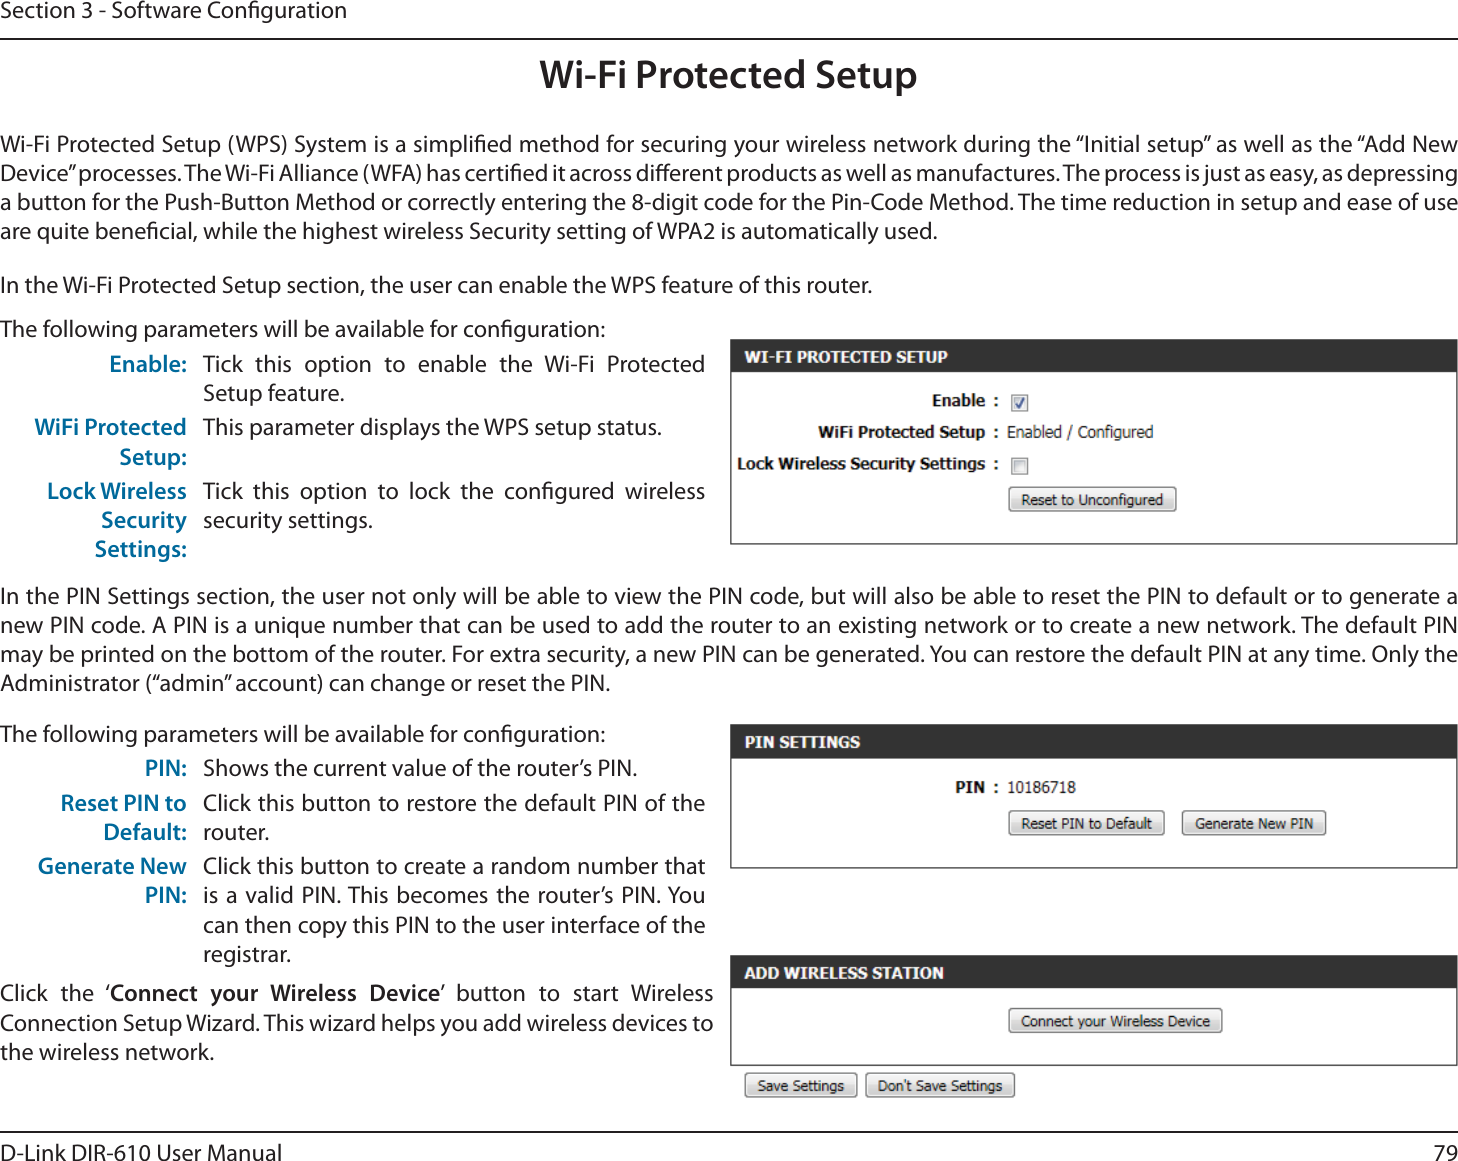 79D-Link DIR-610 User ManualSection 3 - Software CongurationWi-Fi Protected SetupWi-Fi Protected Setup (WPS) System is a simplied method for securing your wireless network during the “Initial setup” as well as the “Add New Device” processes. The Wi-Fi Alliance (WFA) has certied it across dierent products as well as manufactures. The process is just as easy, as depressing a button for the Push-Button Method or correctly entering the 8-digit code for the Pin-Code Method. The time reduction in setup and ease of use are quite benecial, while the highest wireless Security setting of WPA2 is automatically used.The following parameters will be available for conguration:Enable: Tick this option to enable the Wi-Fi Protected Setup feature.WiFi Protected Setup:This parameter displays the WPS setup status.Lock Wireless Security Settings:Tick this option to lock the congured wireless security settings.In the PIN Settings section, the user not only will be able to view the PIN code, but will also be able to reset the PIN to default or to generate a new PIN code. A PIN is a unique number that can be used to add the router to an existing network or to create a new network. The default PIN may be printed on the bottom of the router. For extra security, a new PIN can be generated. You can restore the default PIN at any time. Only the Administrator (“admin” account) can change or reset the PIN.In the Wi-Fi Protected Setup section, the user can enable the WPS feature of this router. The following parameters will be available for conguration:PIN: Shows the current value of the router’s PIN.Reset PIN to Default:Click this button to restore the default PIN of the router.Generate New PIN:Click this button to create a random number that is a valid PIN. This becomes the router’s PIN. You can then copy this PIN to the user interface of the registrar.Click the ‘Connect your Wireless Device’ button to start Wireless Connection Setup Wizard. This wizard helps you add wireless devices to the wireless network.